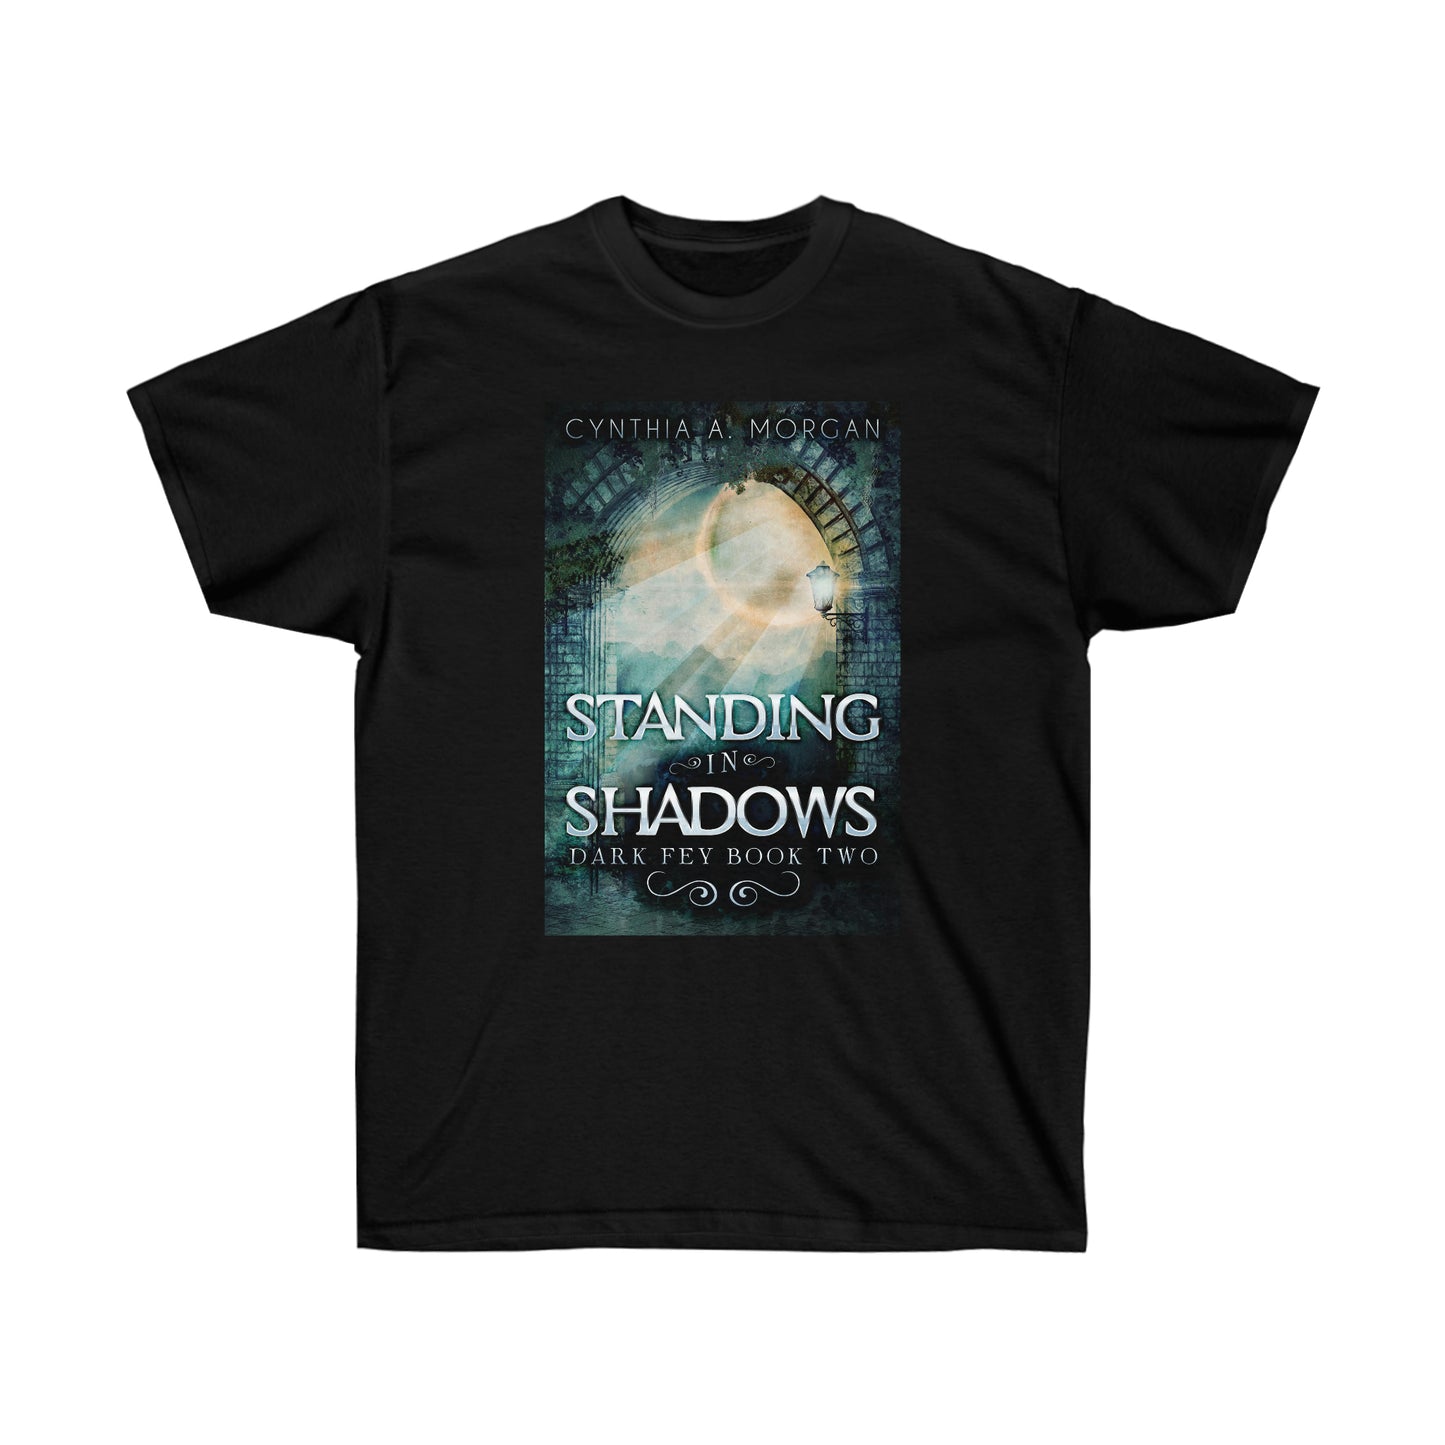 Standing in Shadows - Unisex T-Shirt